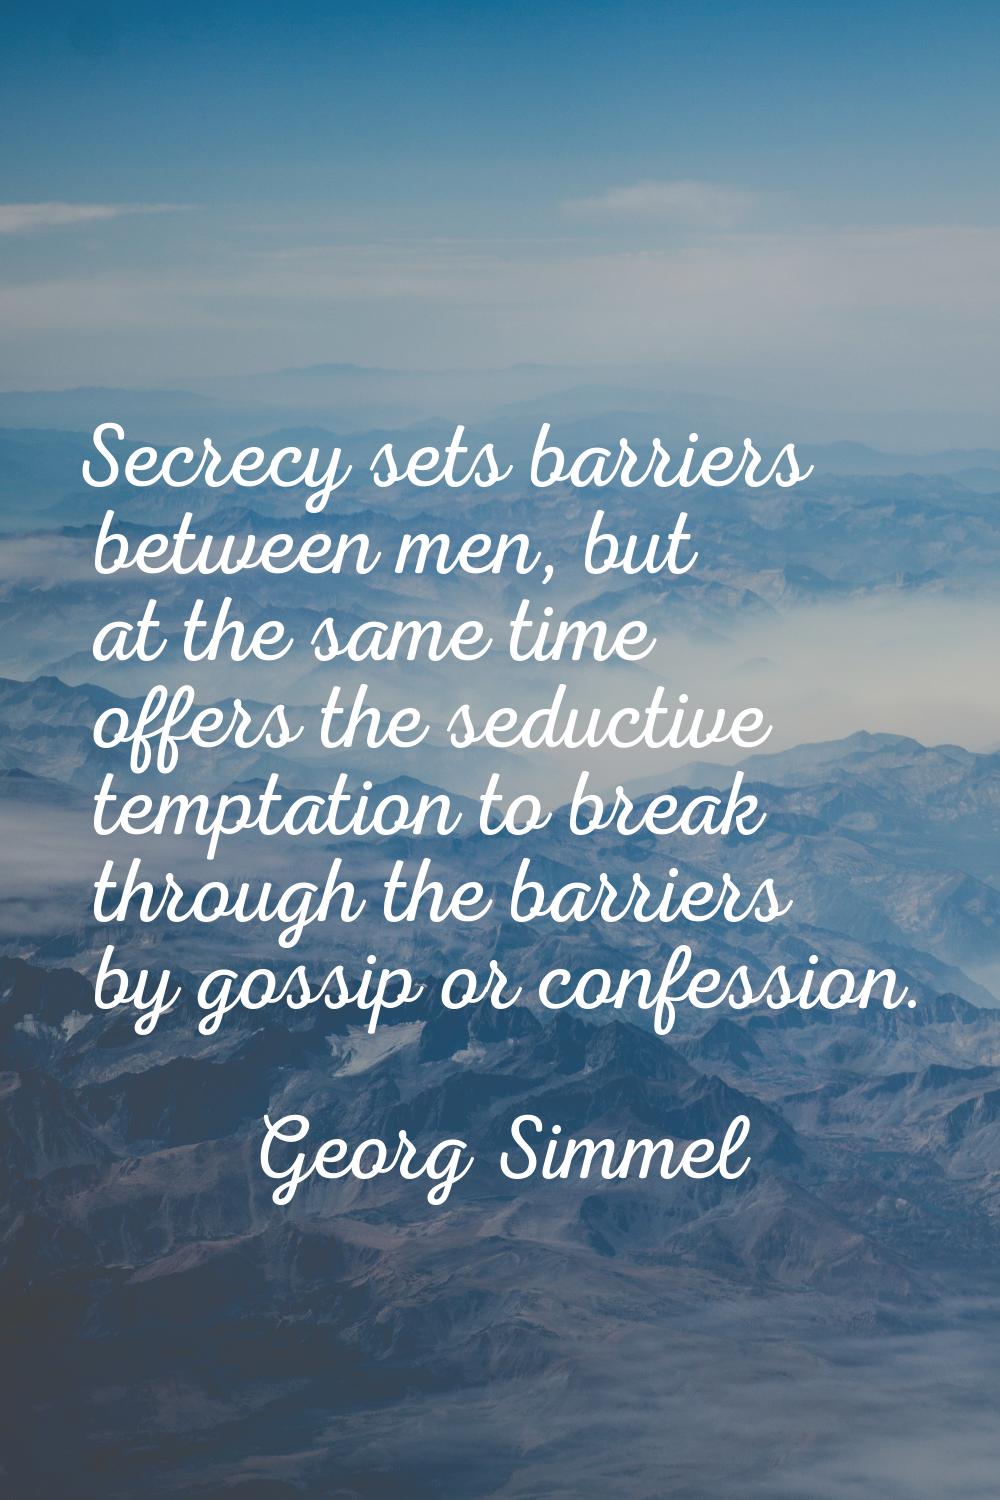 Secrecy sets barriers between men, but at the same time offers the seductive temptation to break th